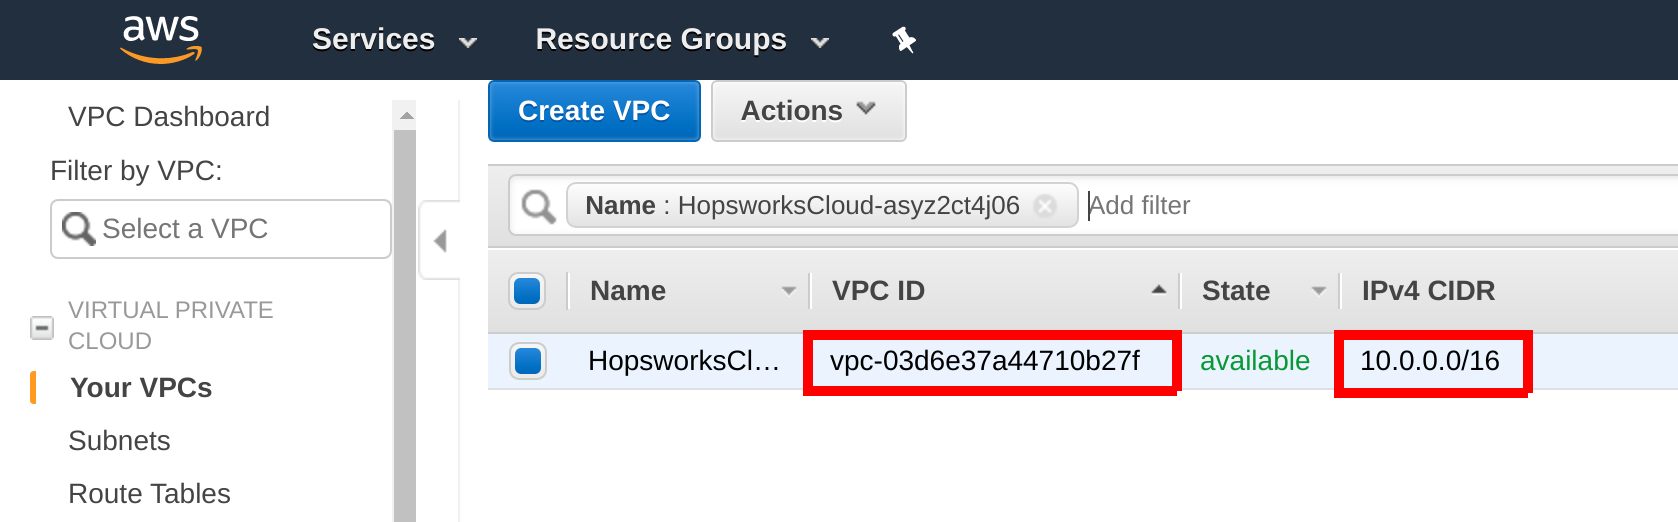 Identify the Feature Store VPC